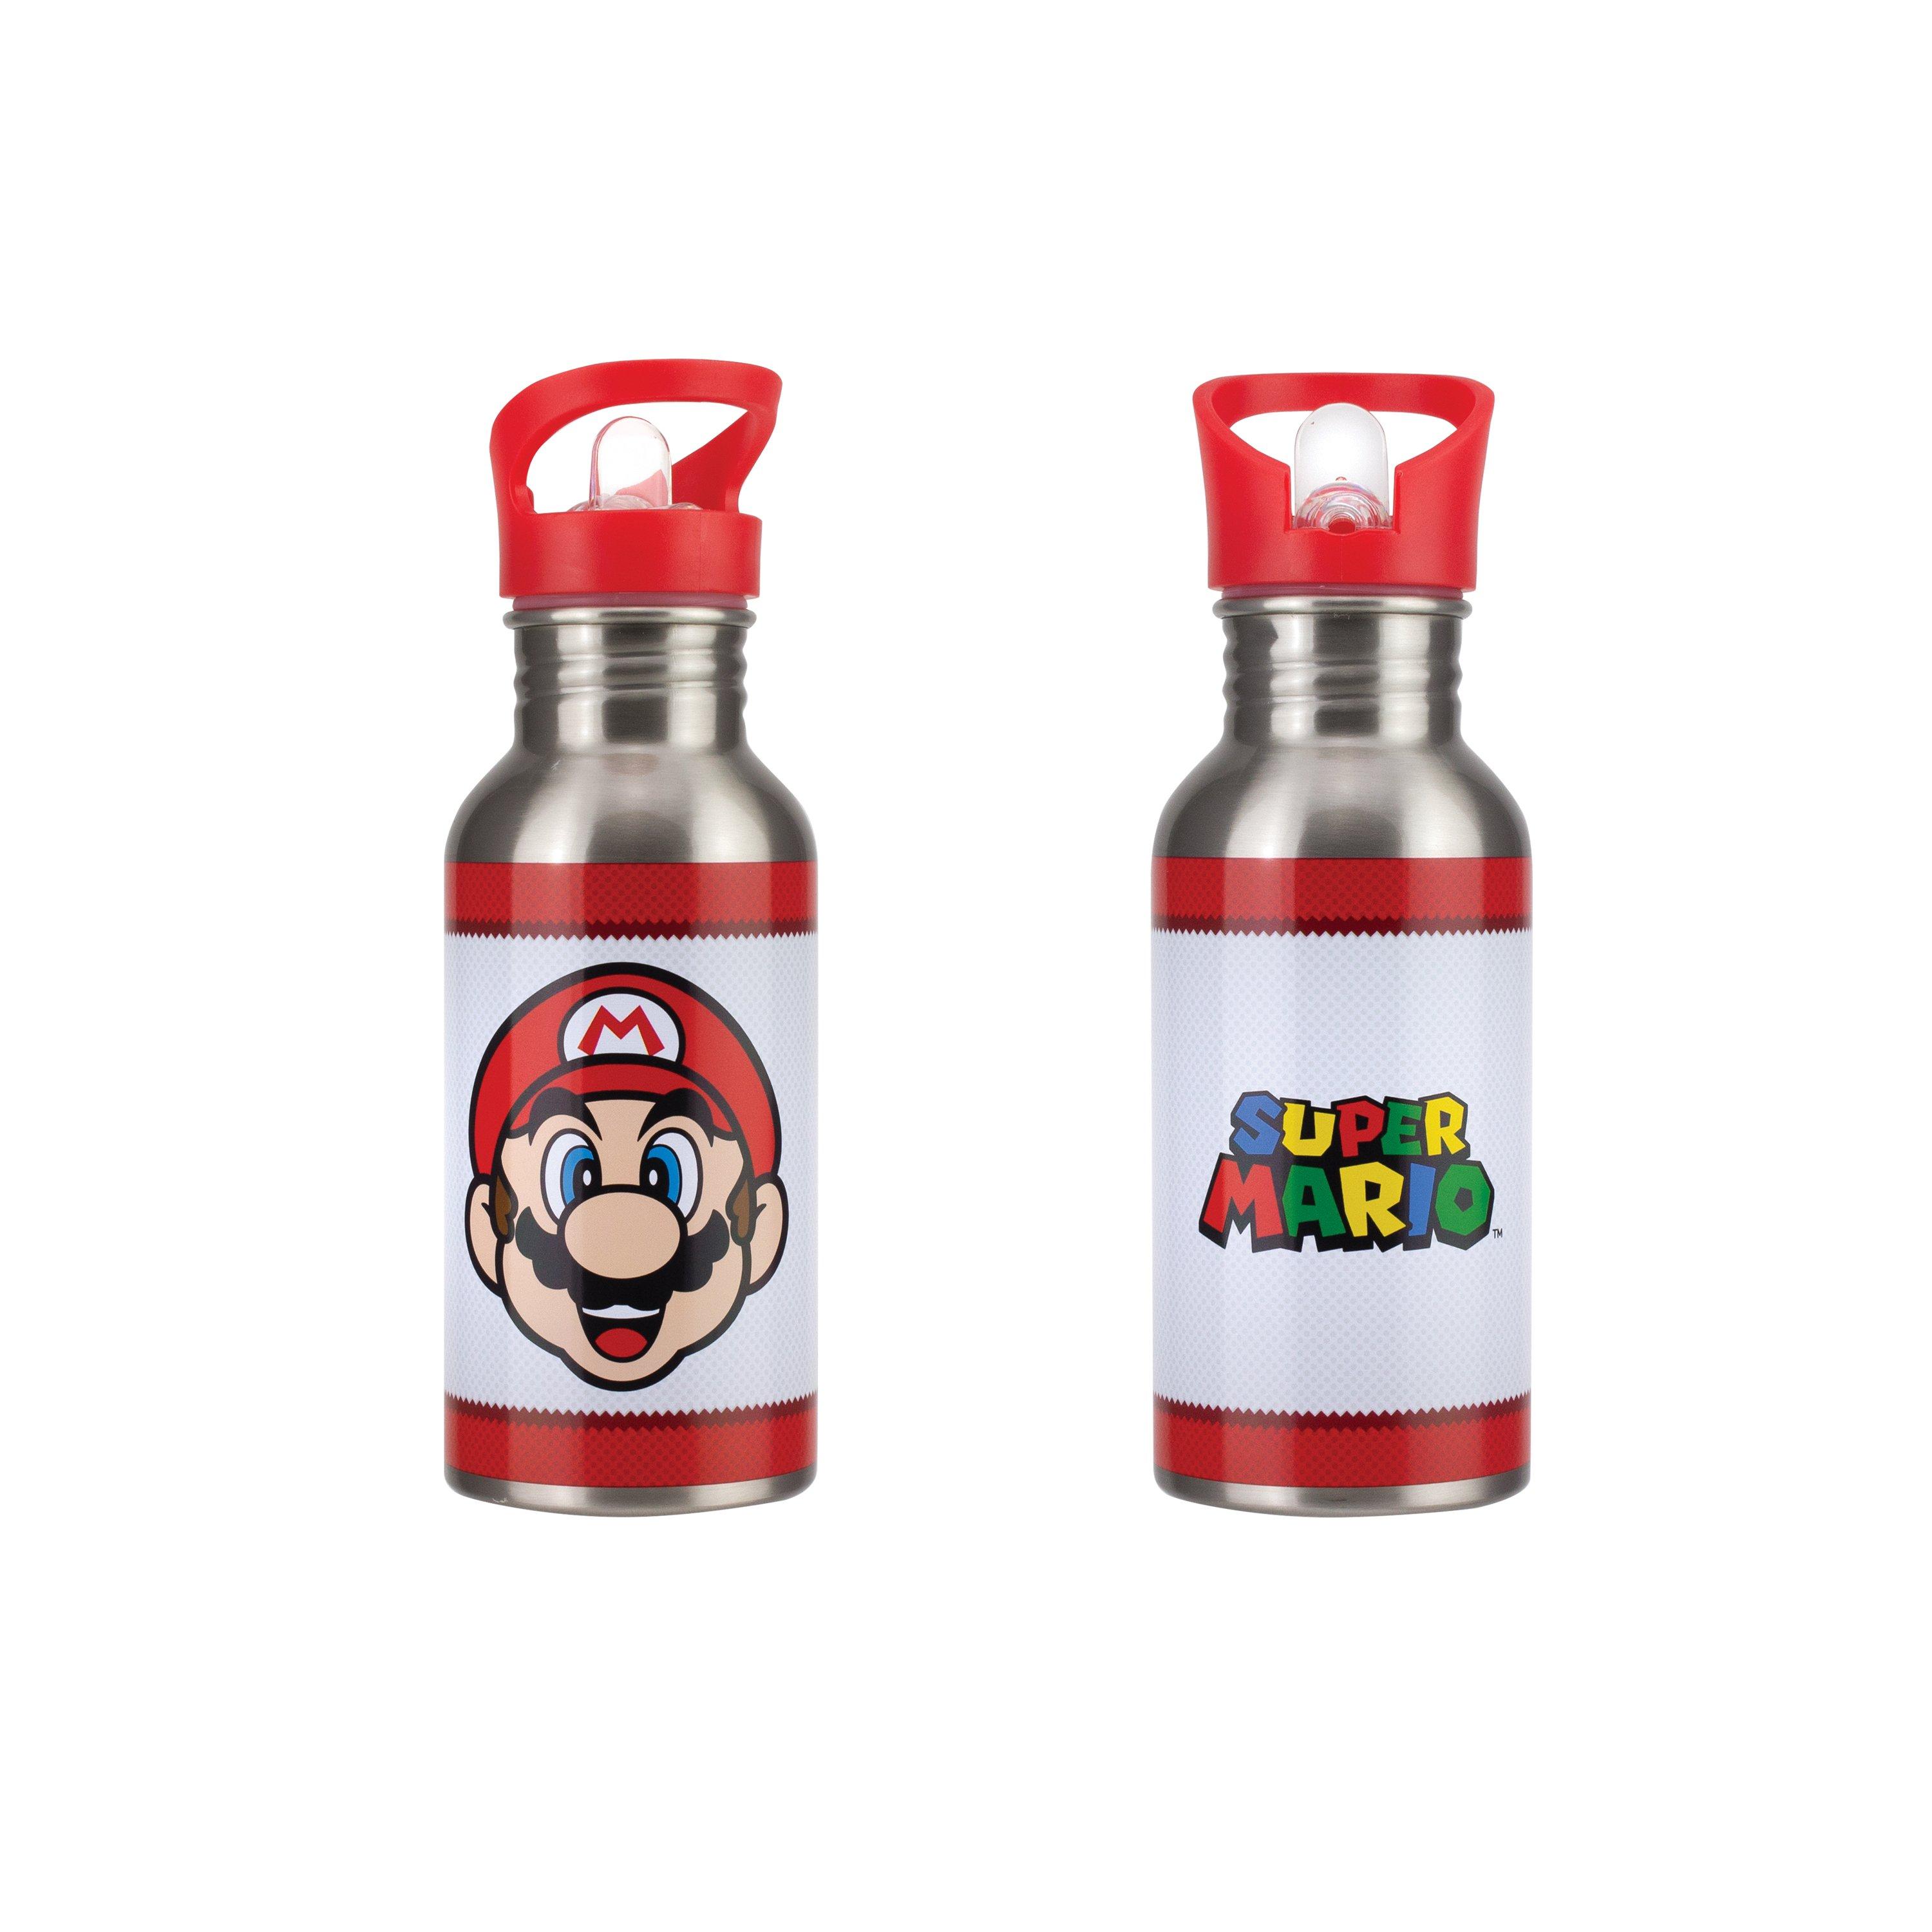 New Super Mario Stainless Steel 304 Thermos Mug 420ml Water Bottle